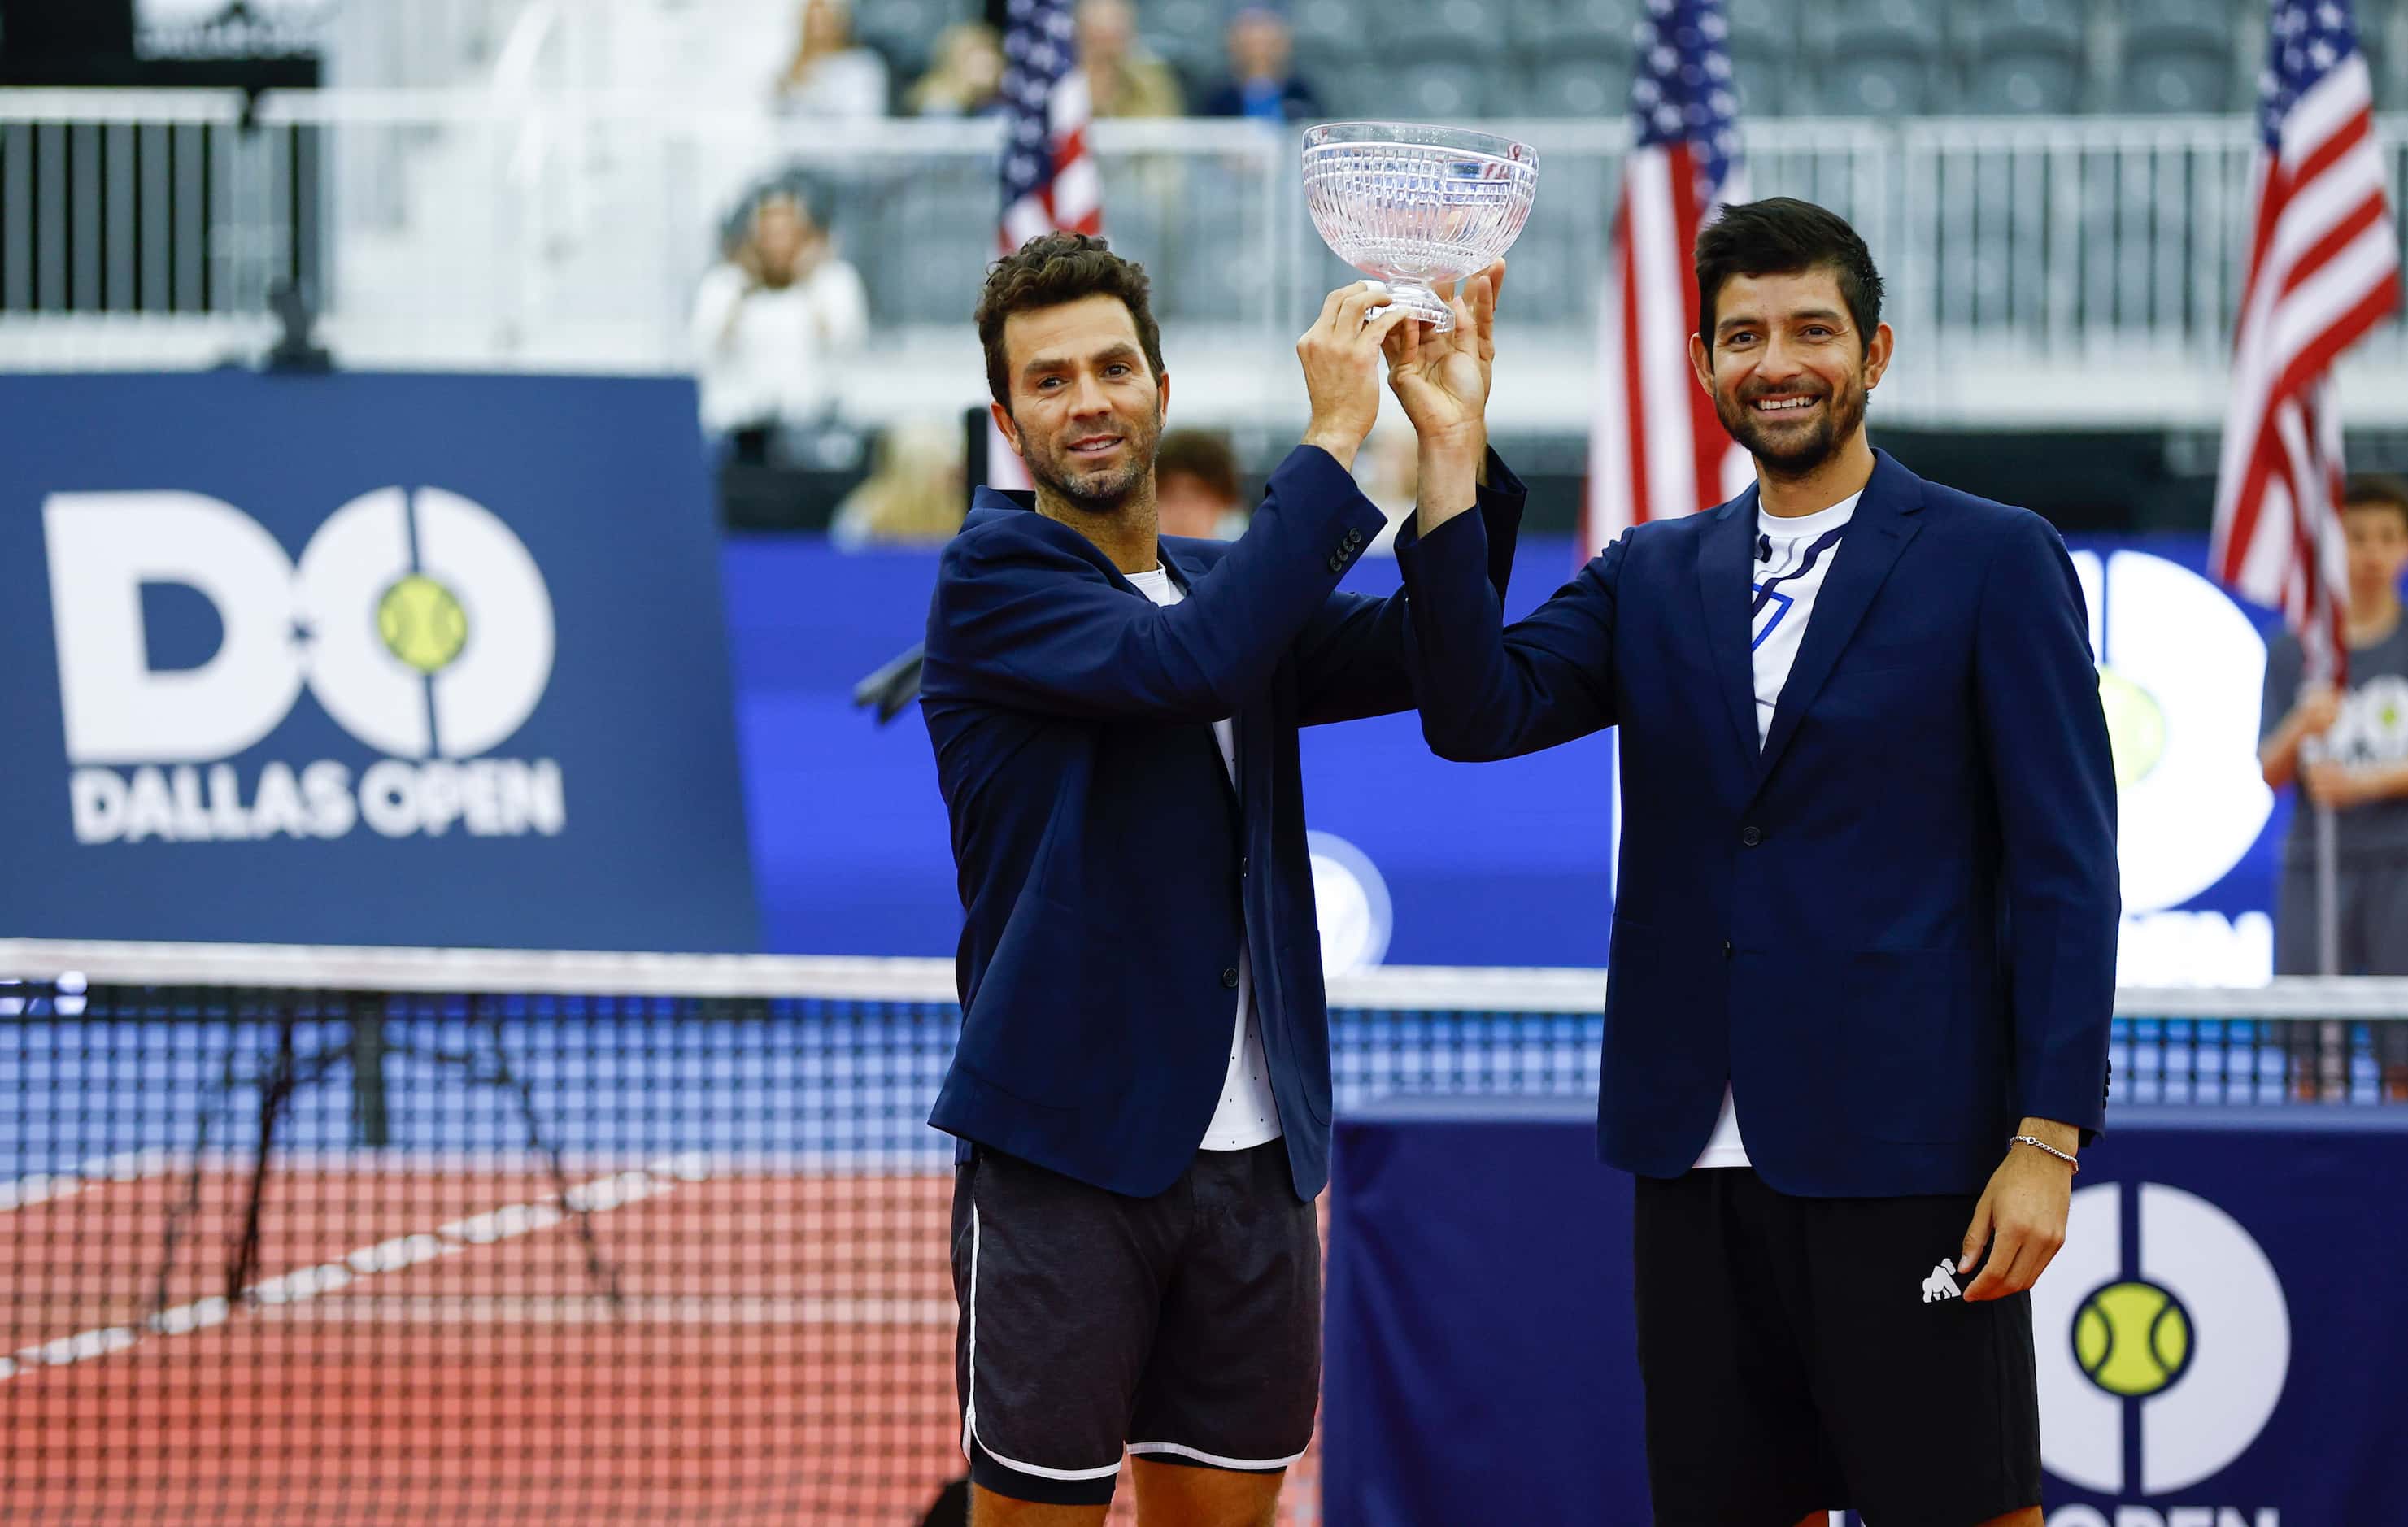 Jean-Julien Rojer, left, and Marcelo Arevalo celebrate winning the doubles final of the ATP...